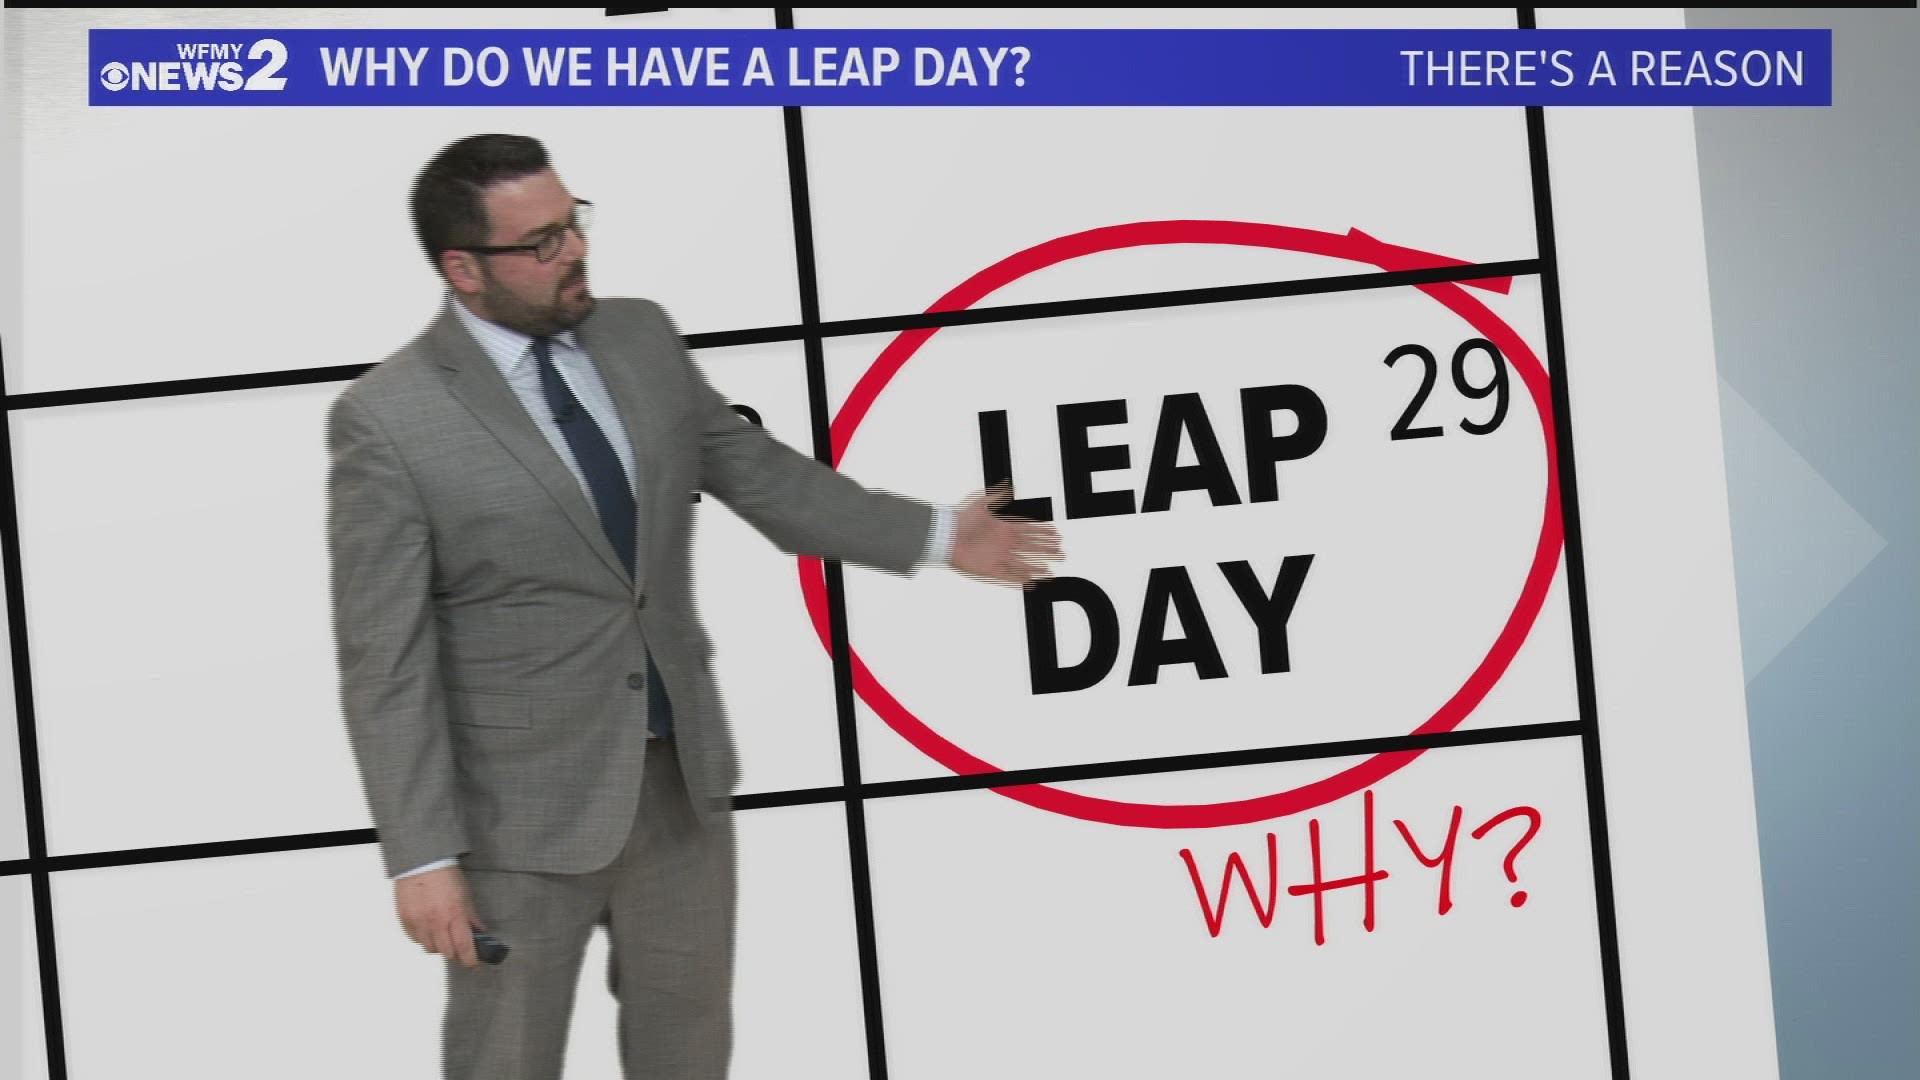 Leap Days are actually really important. Chief Meteorologist Tim Buckley explains why we need February 29th every 4 years. (Hint: There's a lot of math!)